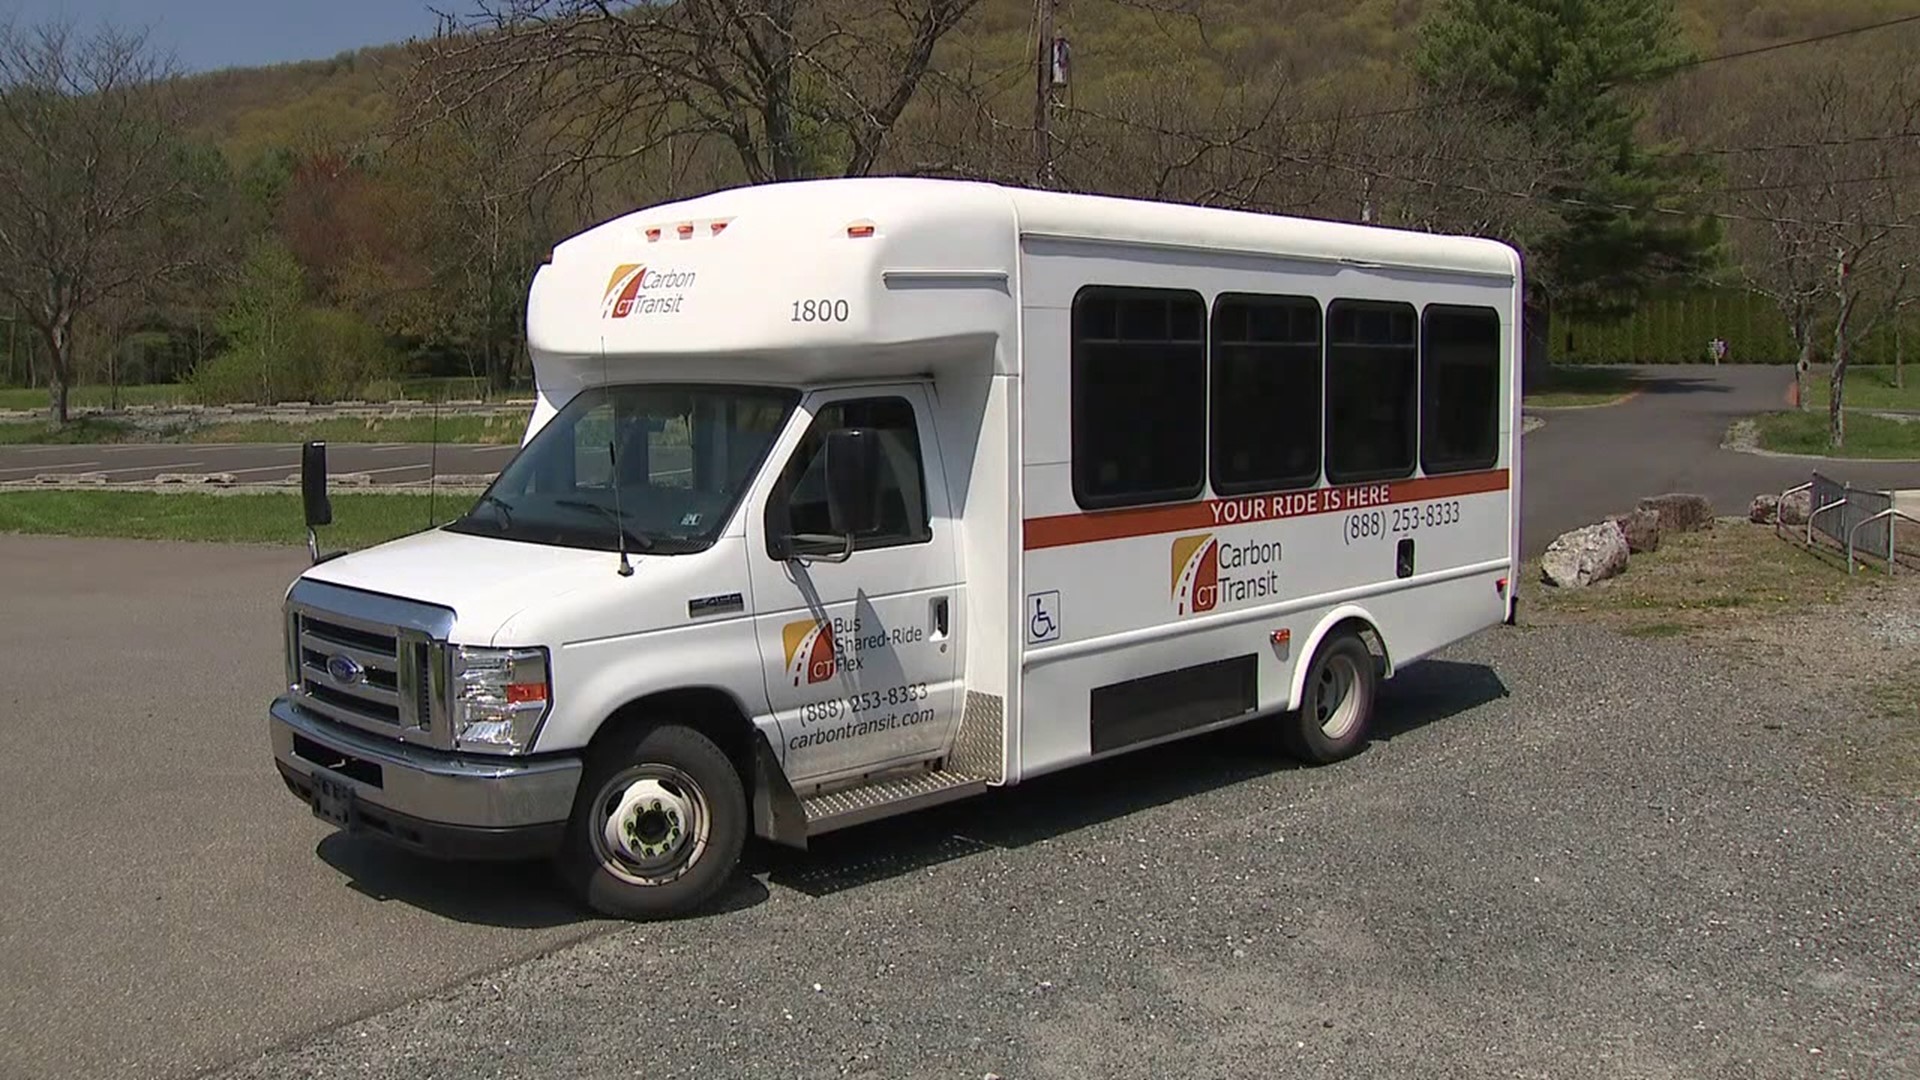 A new ride in Carbon County is making it easier for people to get to the beach this summer.